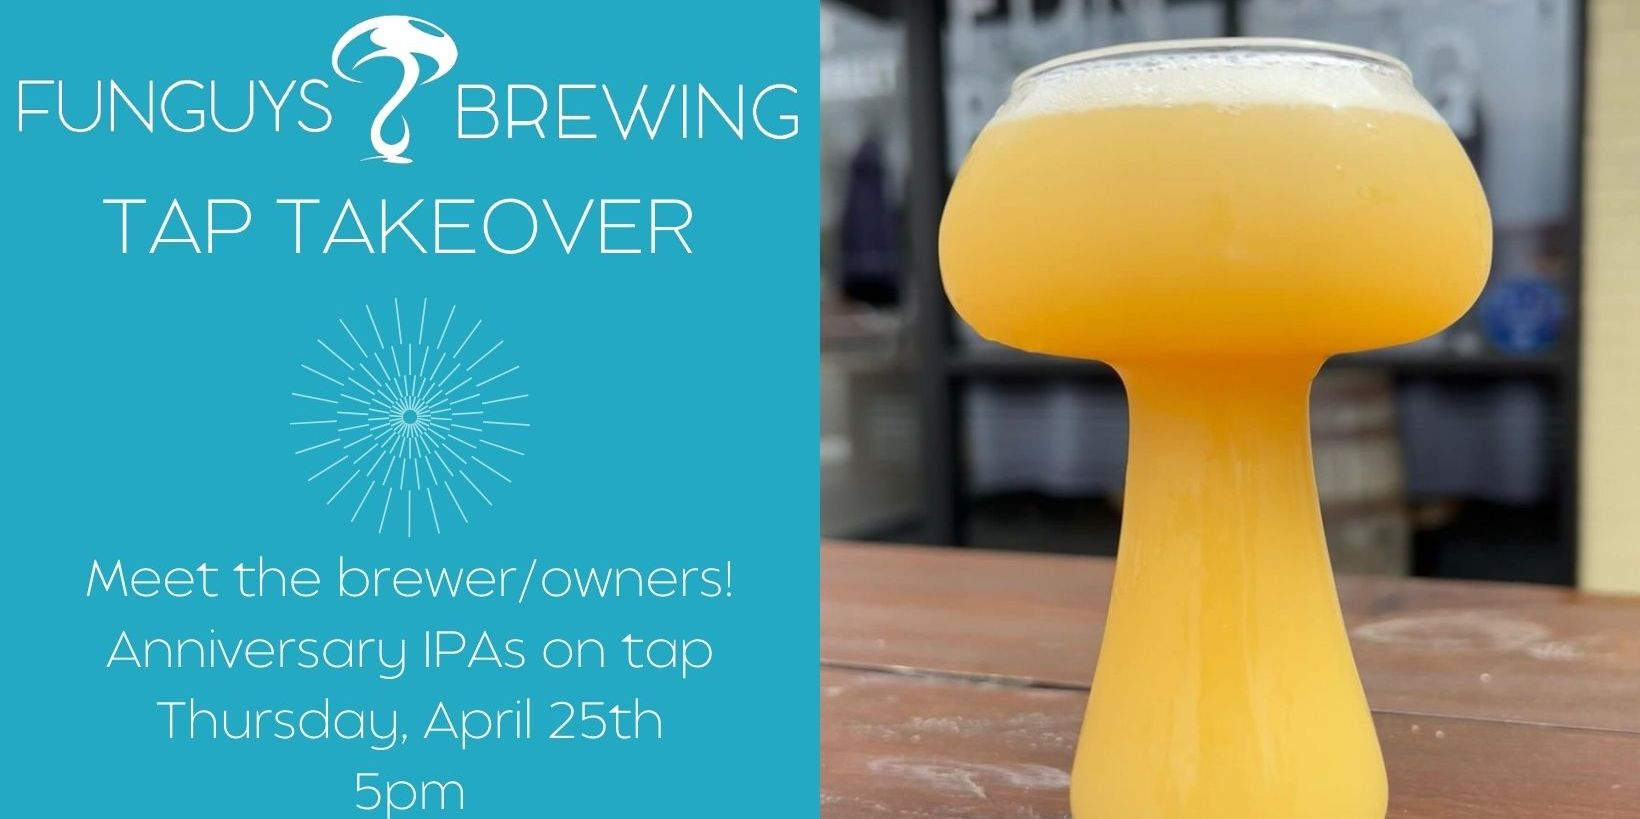 Funguys Brewing Tap Takeover promotional image